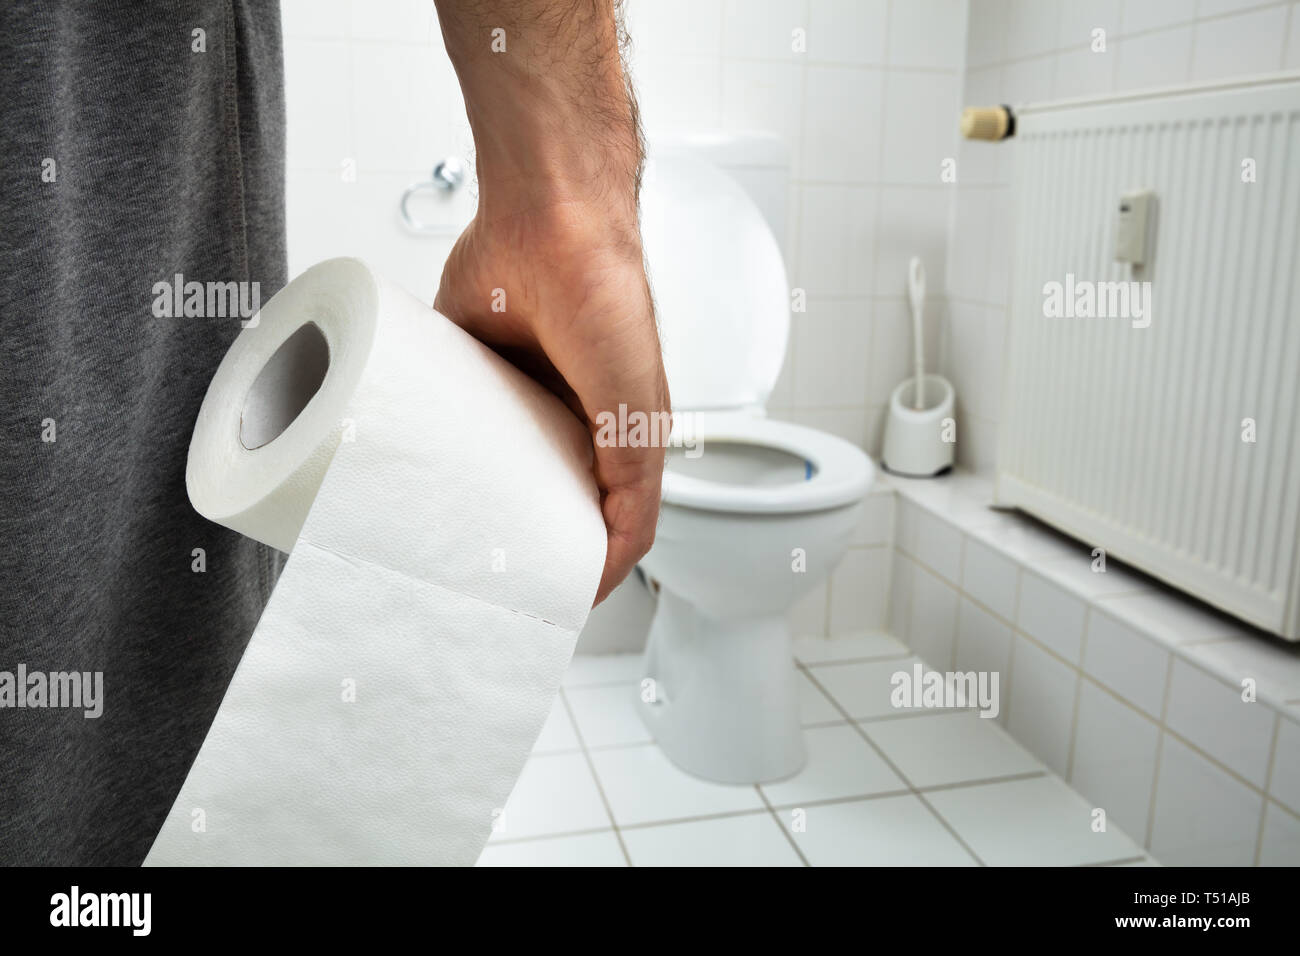 https://c8.alamy.com/comp/T51AJB/man-suffers-from-diarrhea-holding-tissue-paper-roll-standing-in-front-of-toilet-bowl-T51AJB.jpg